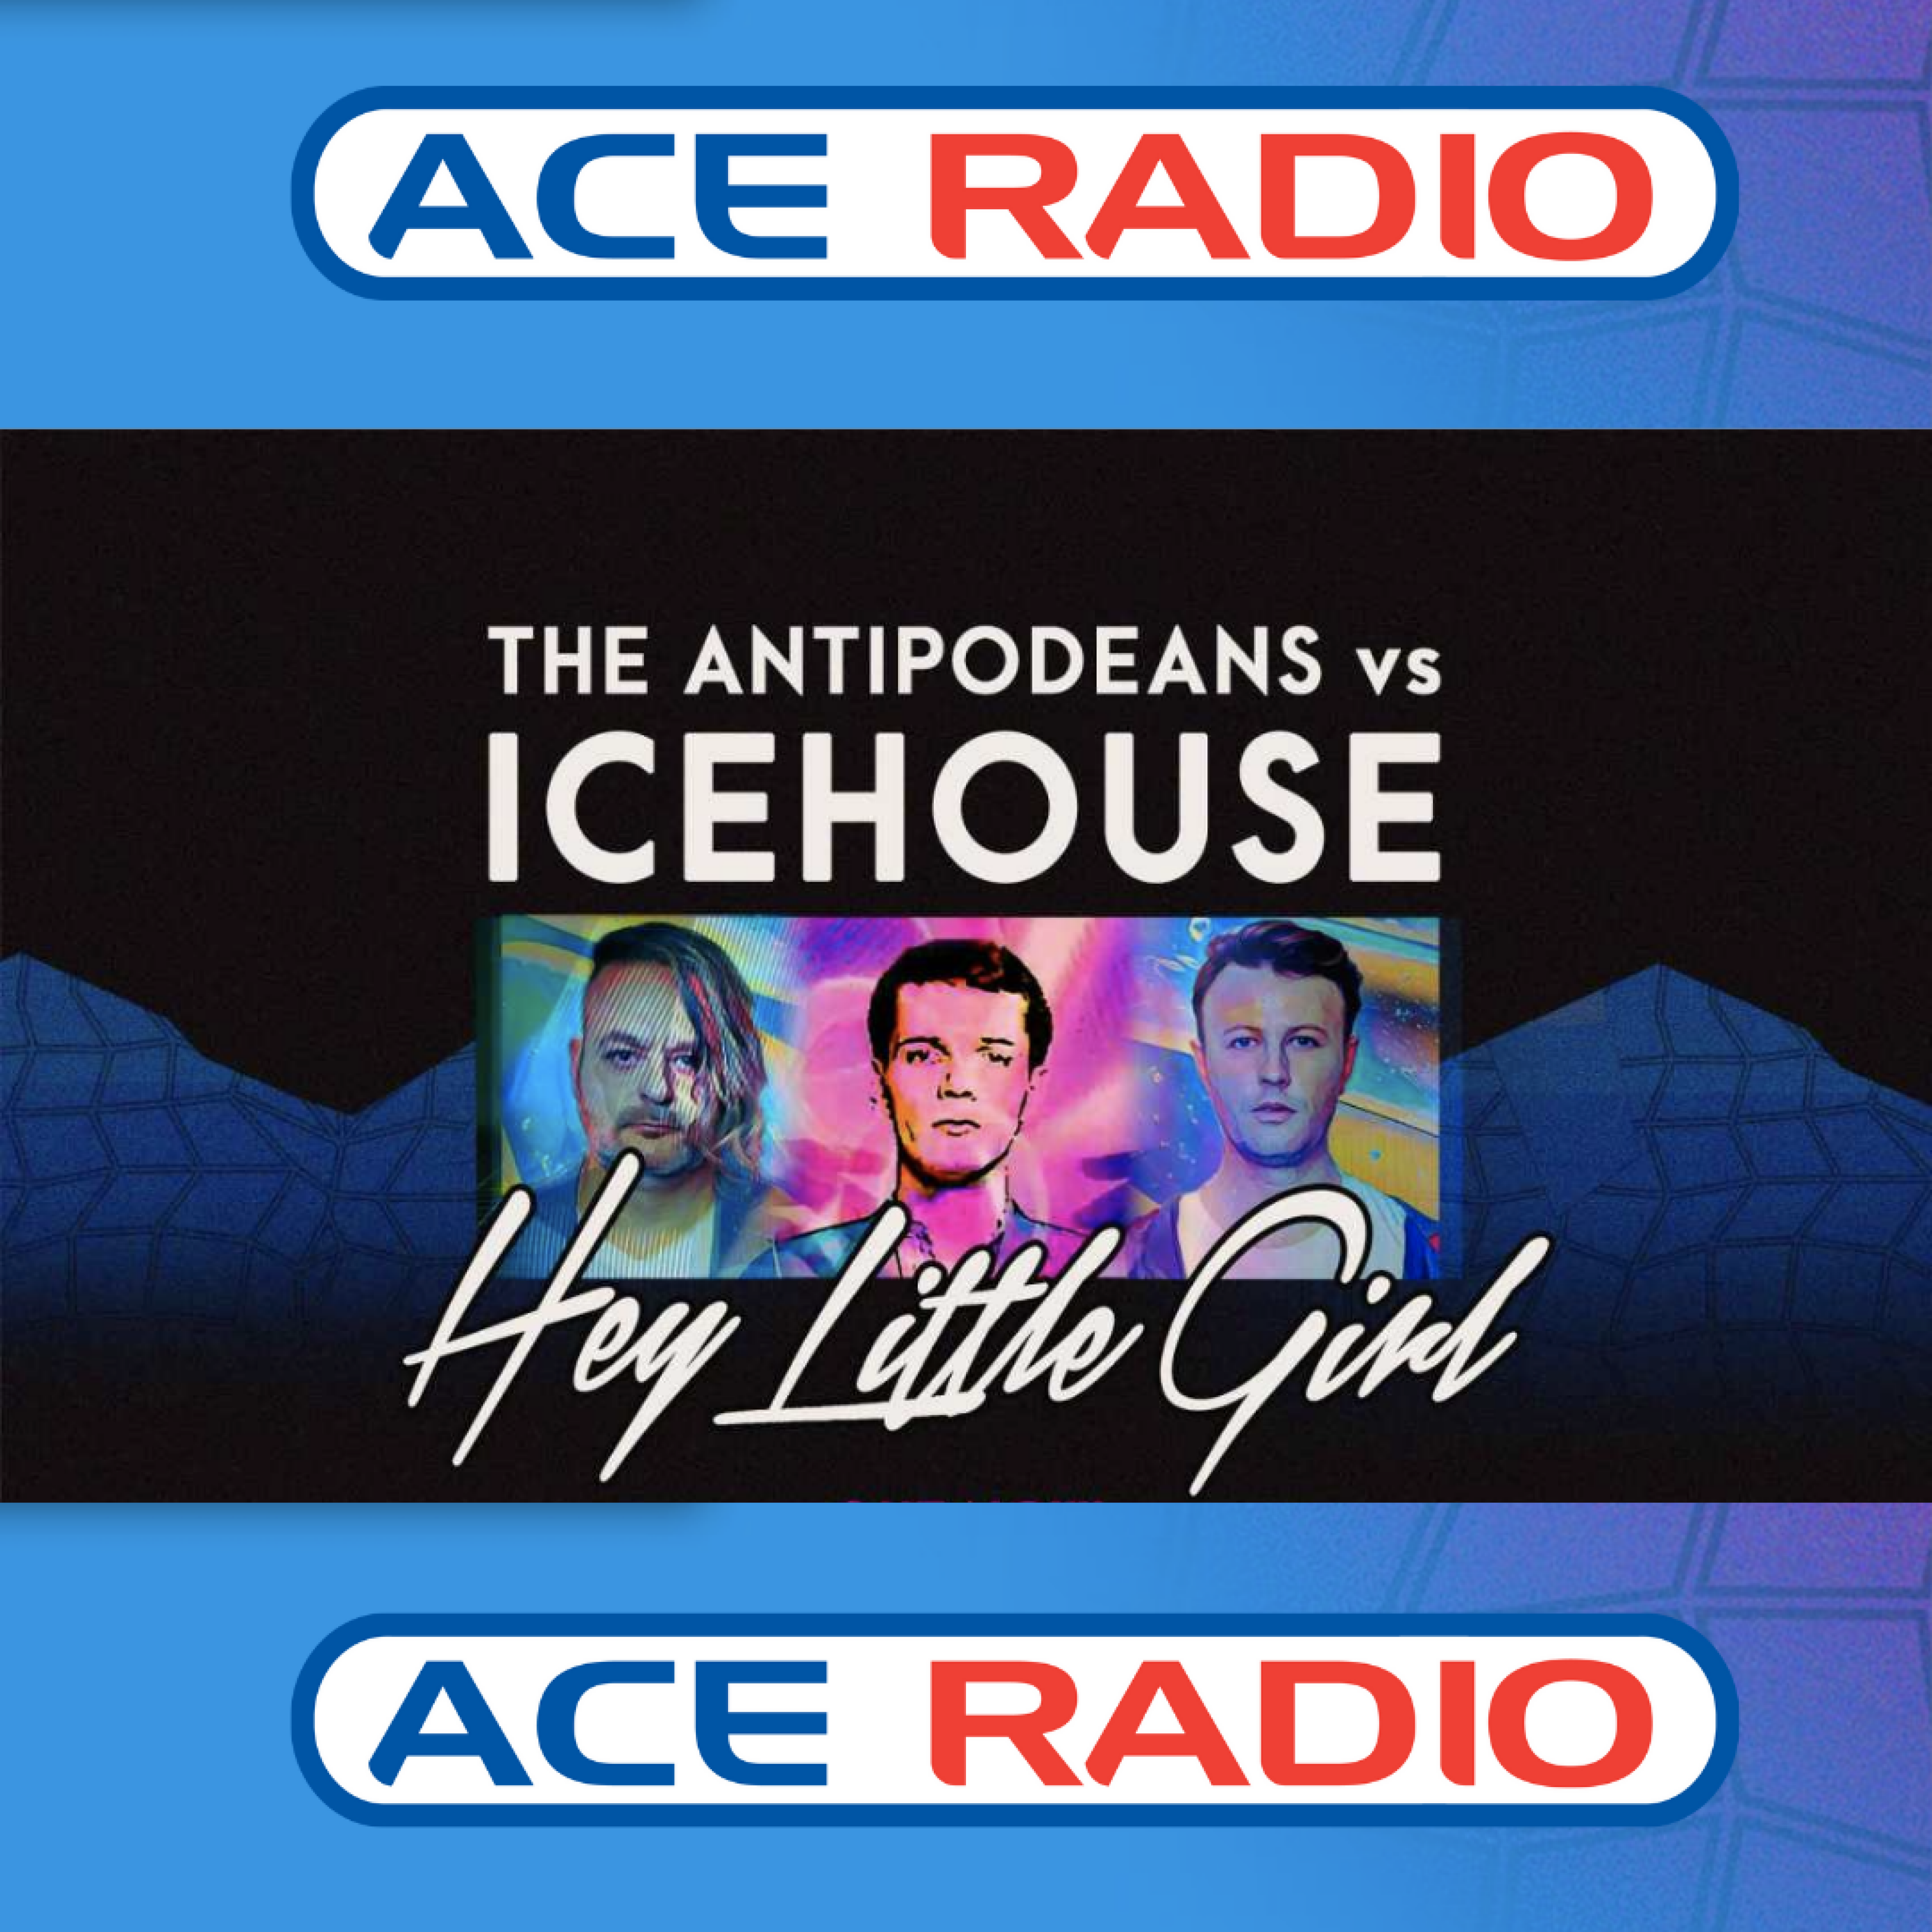 The Antipodeans vs ICEHOUSE - 'Hey Little Girl' Added to Nights across the ACE Radio Network 